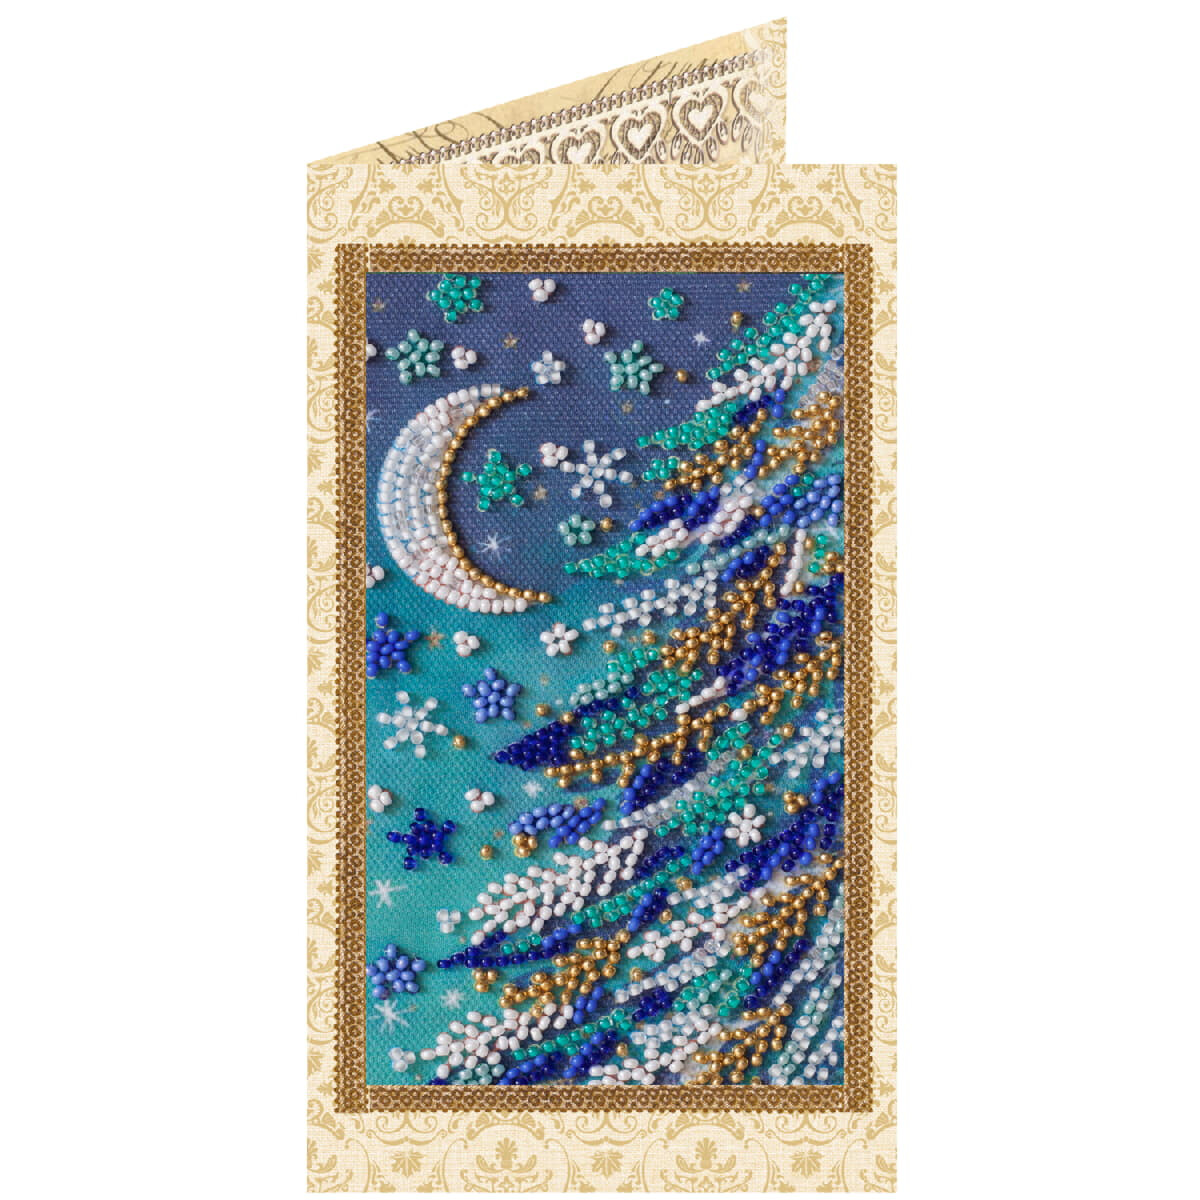 Abris Art greating card stamped bead stitch kit...